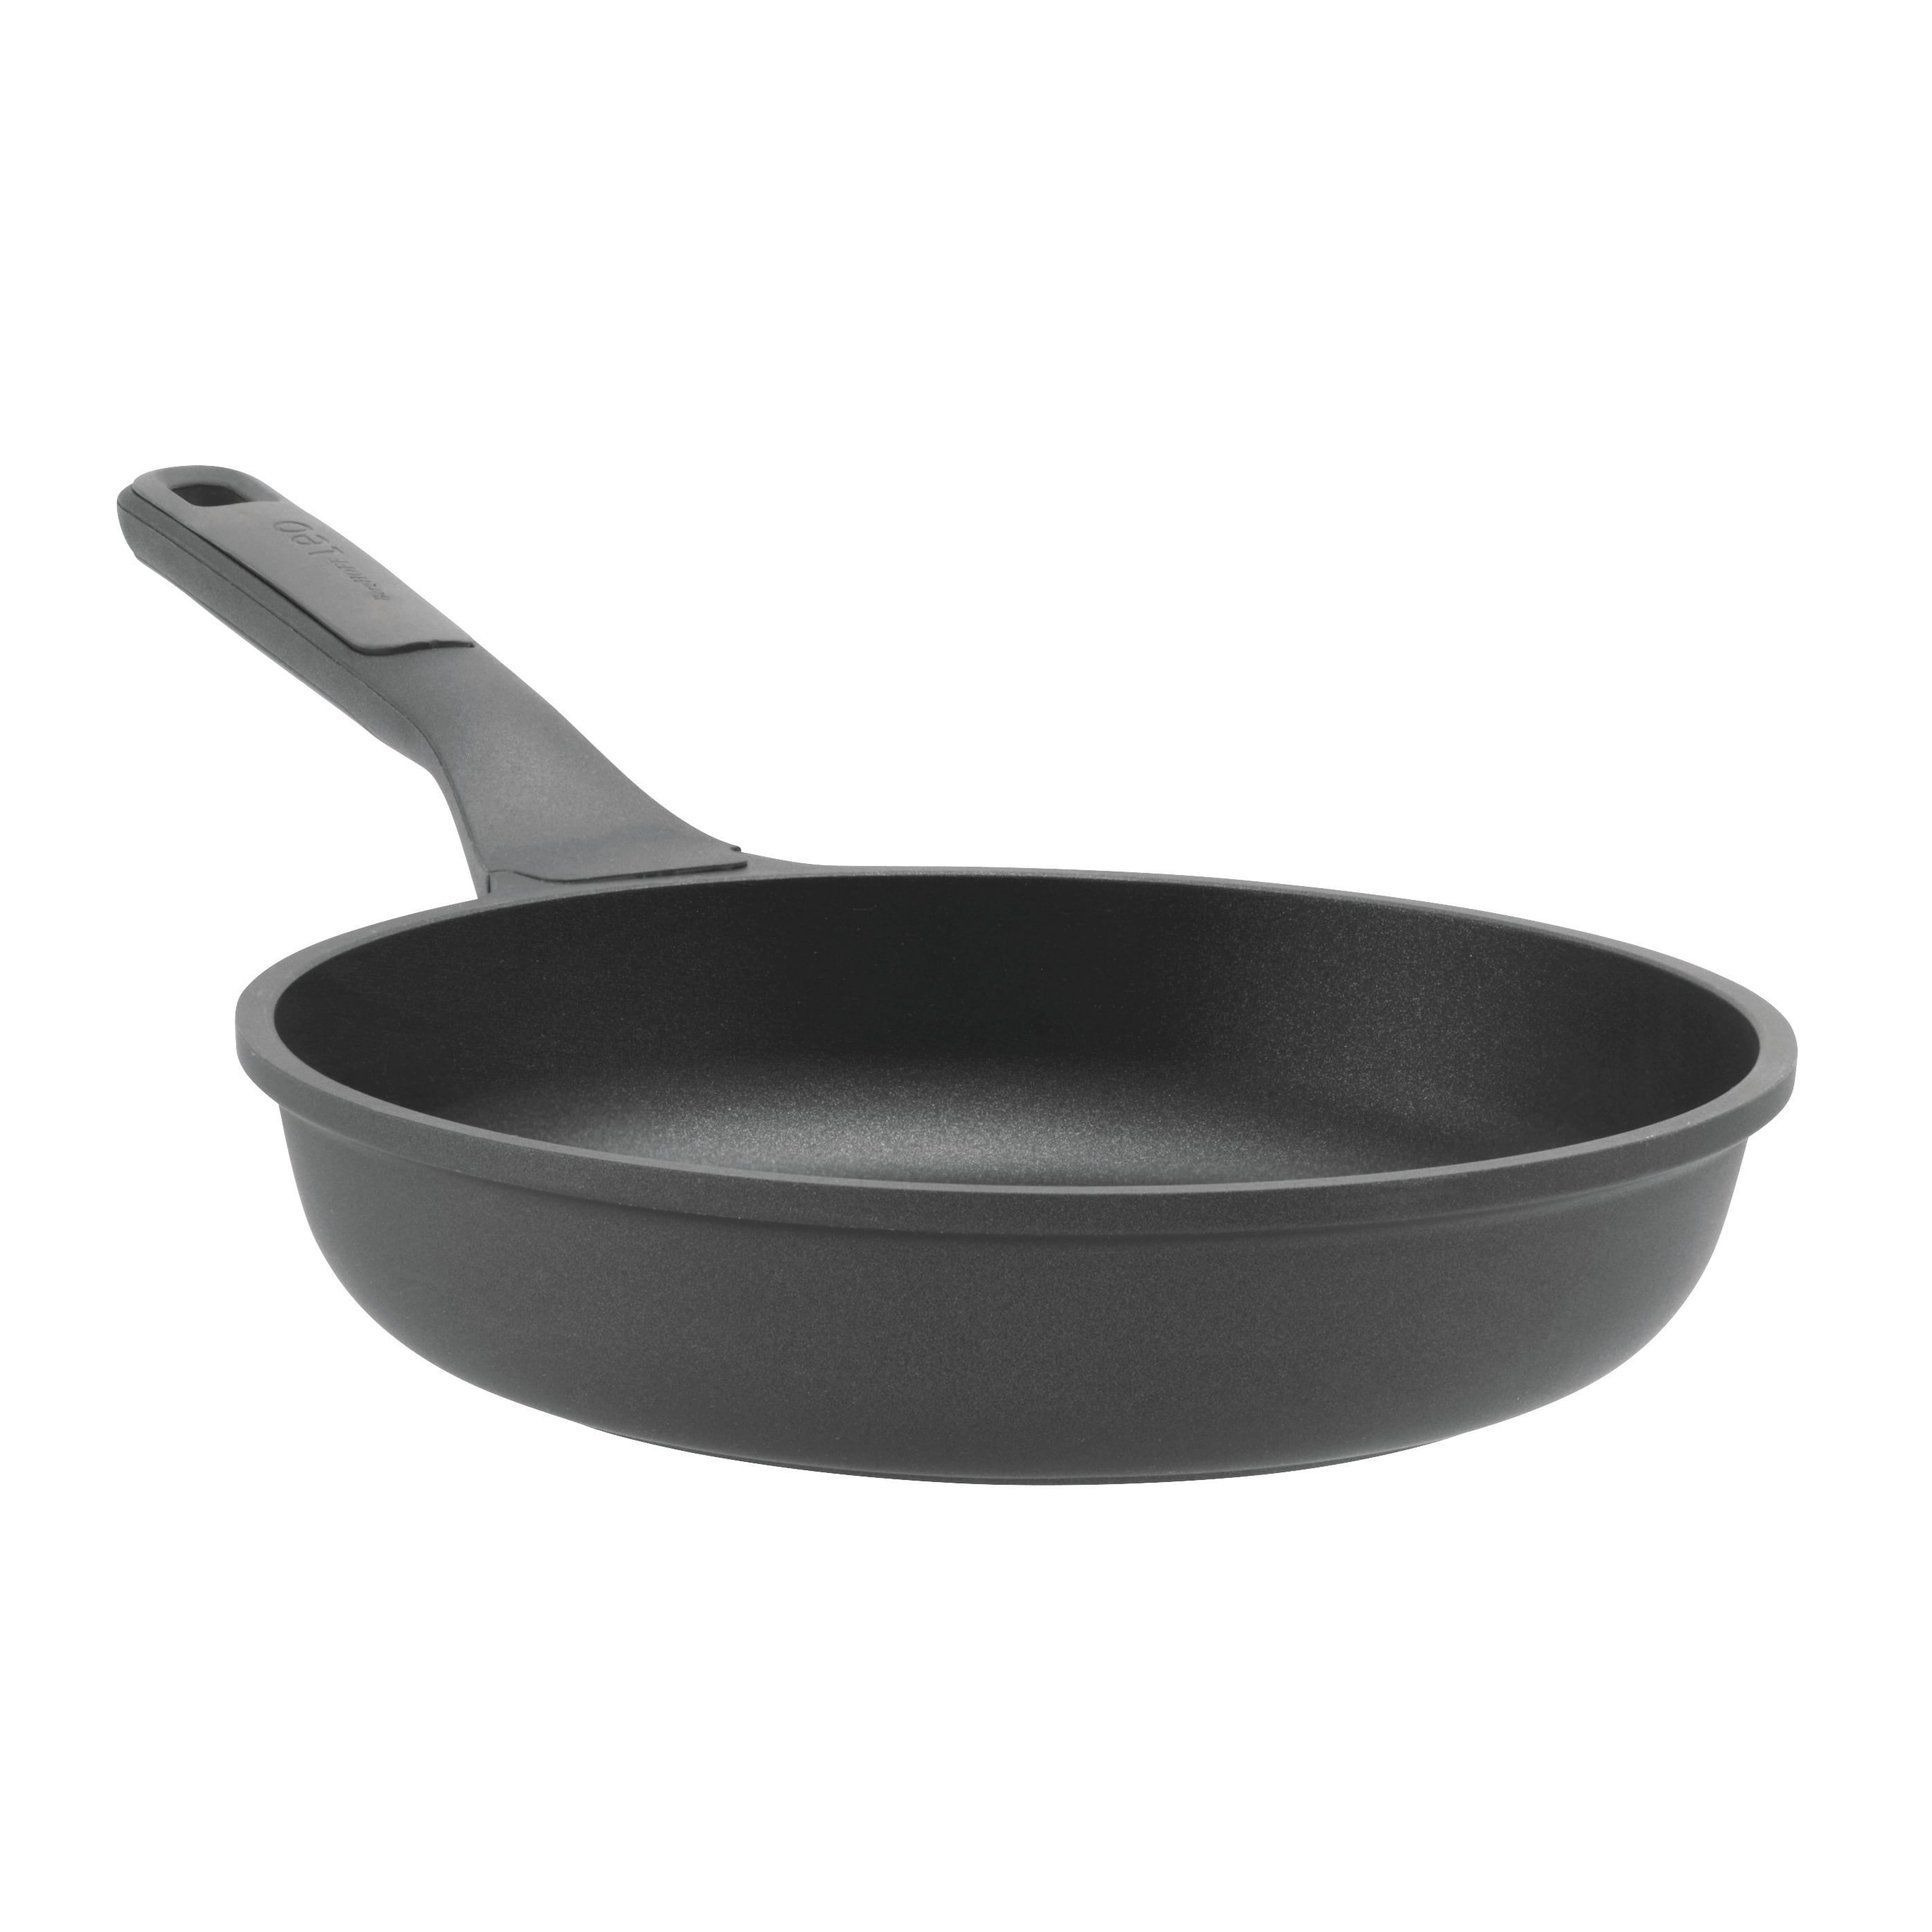 https://ak1.ostkcdn.com/images/products/is/images/direct/d5f17f7855d3e8e464a2024bbd0e88d4ef1ef350/Stone-10%22-NS-Fry-Pan-2.1-Q.jpg